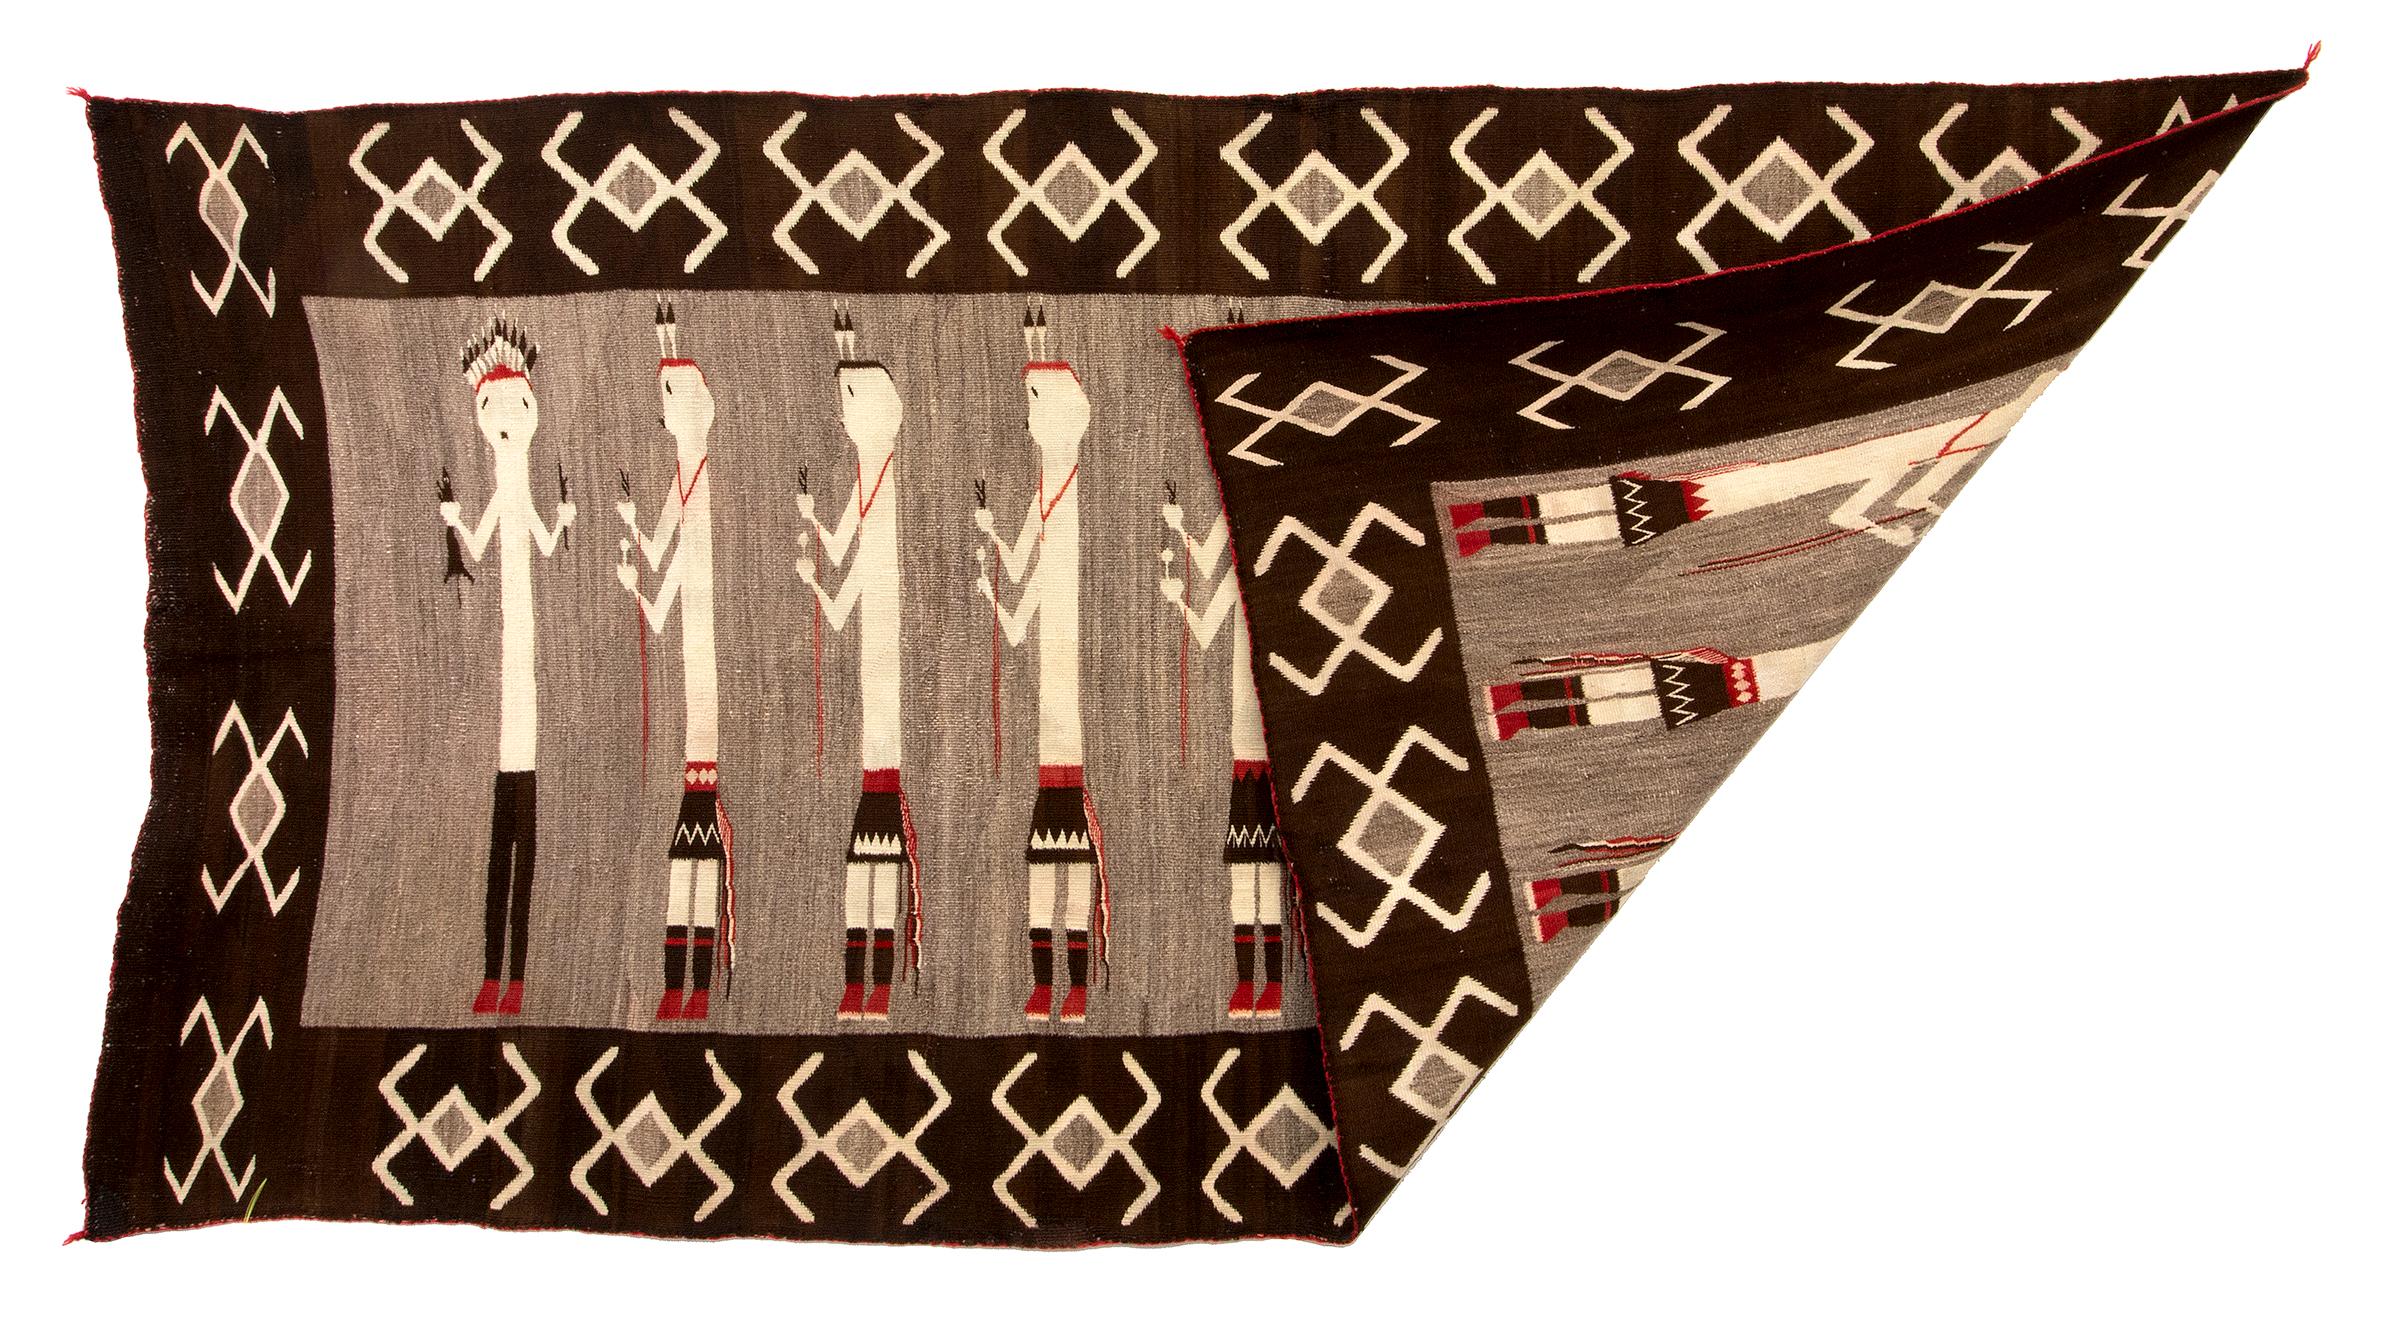 Large vintage Navajo Rug, Pictorial Weaving, circa 1930s with nine Yei or Yeibichai figures wearing traditional dress including kilts and feather headdresses with water bug motifs around the border. Woven of native hand spun wool in natural fleece